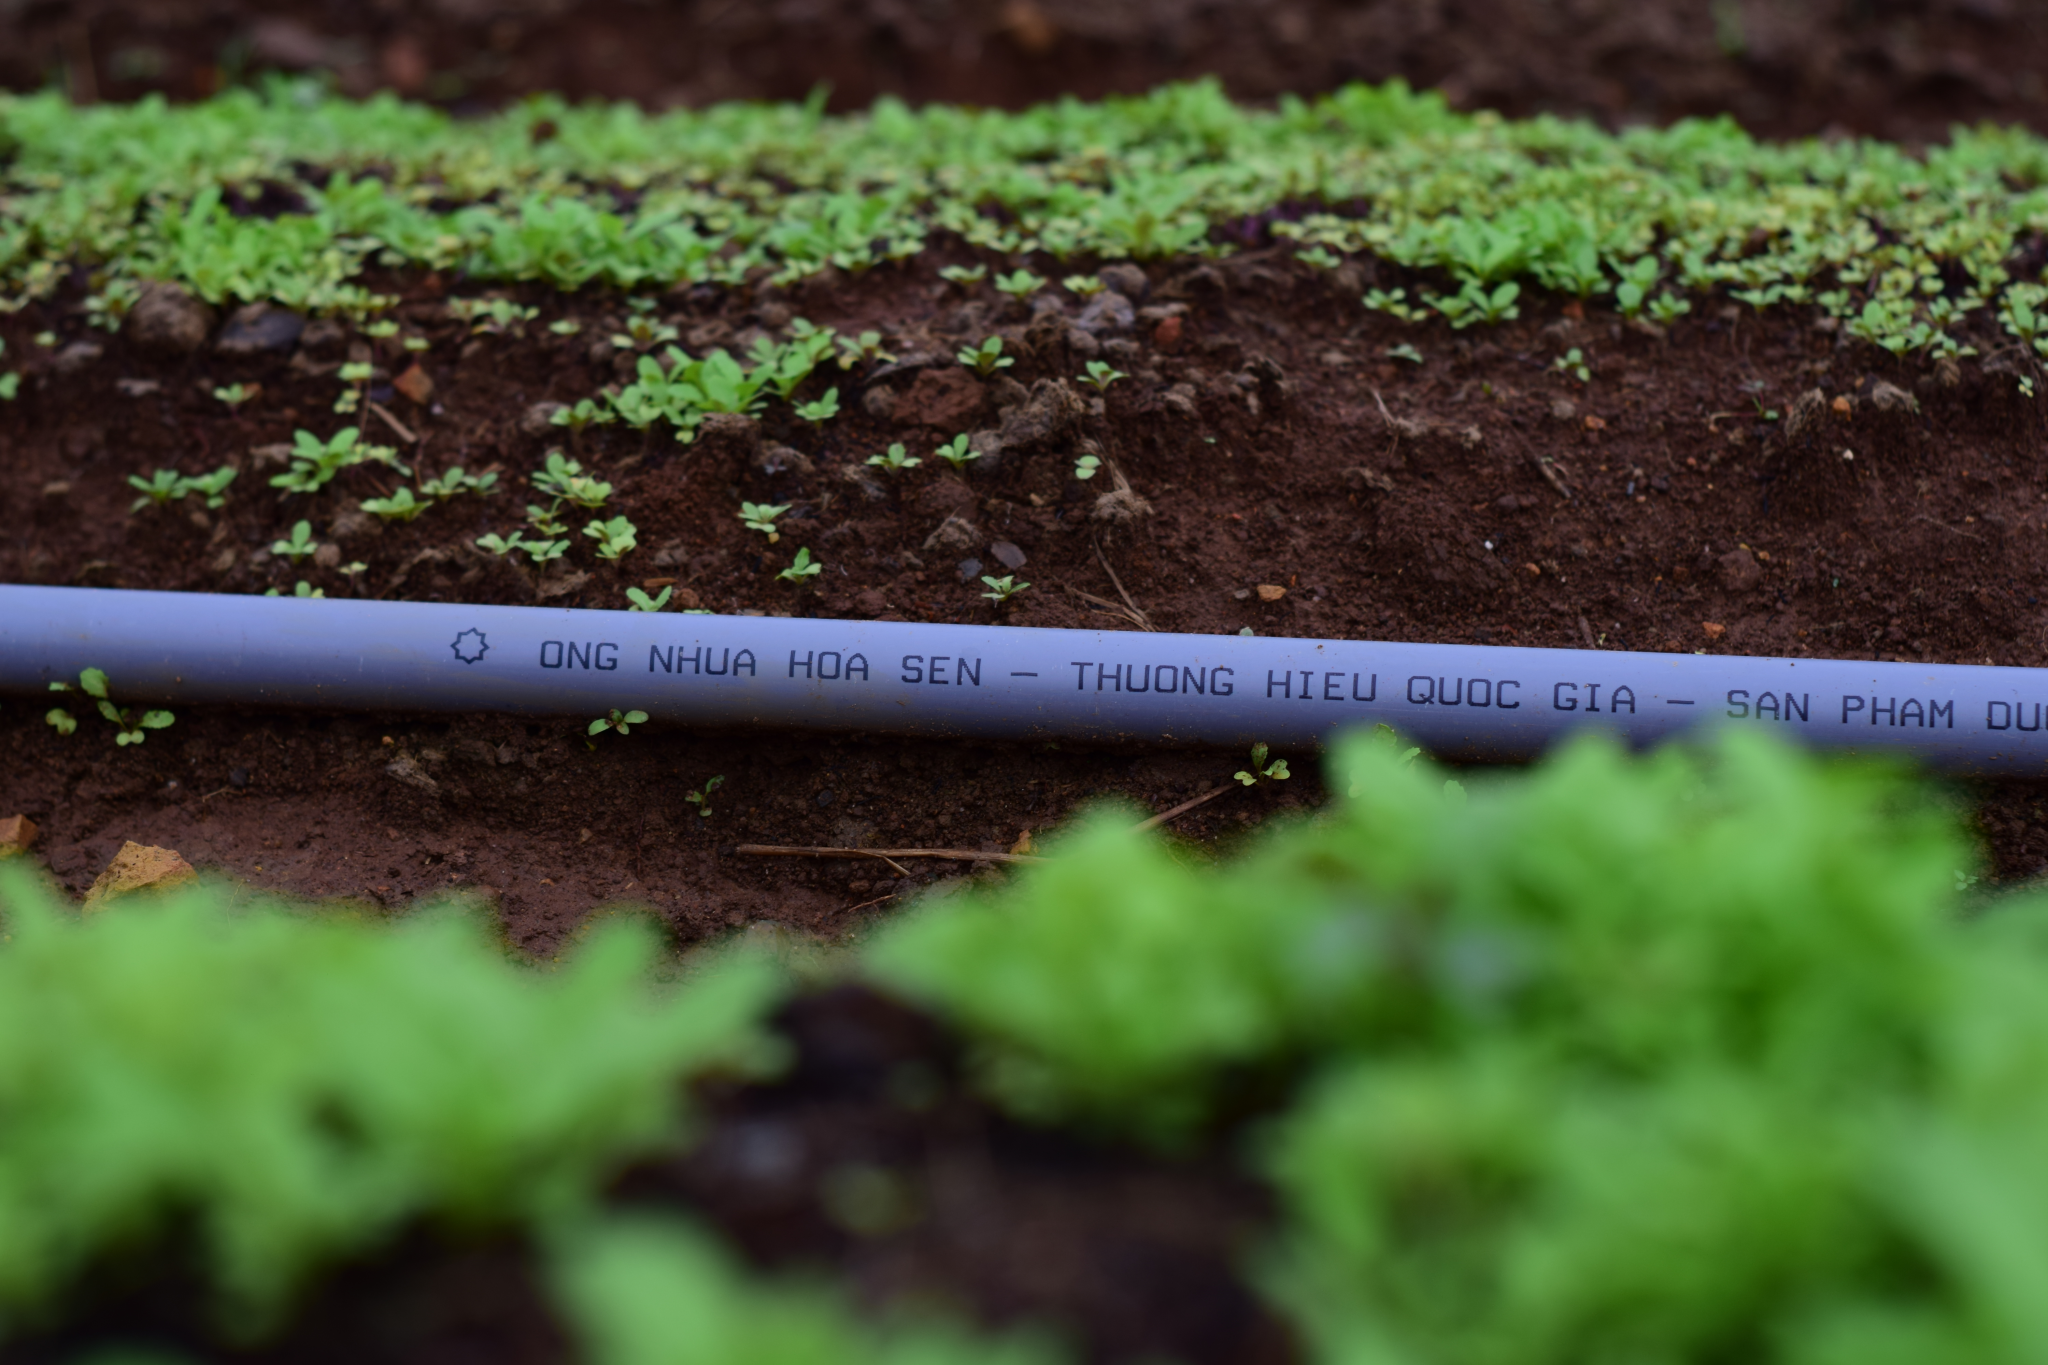 Hoa Sen plastic pipes – For a sustainable agriculture